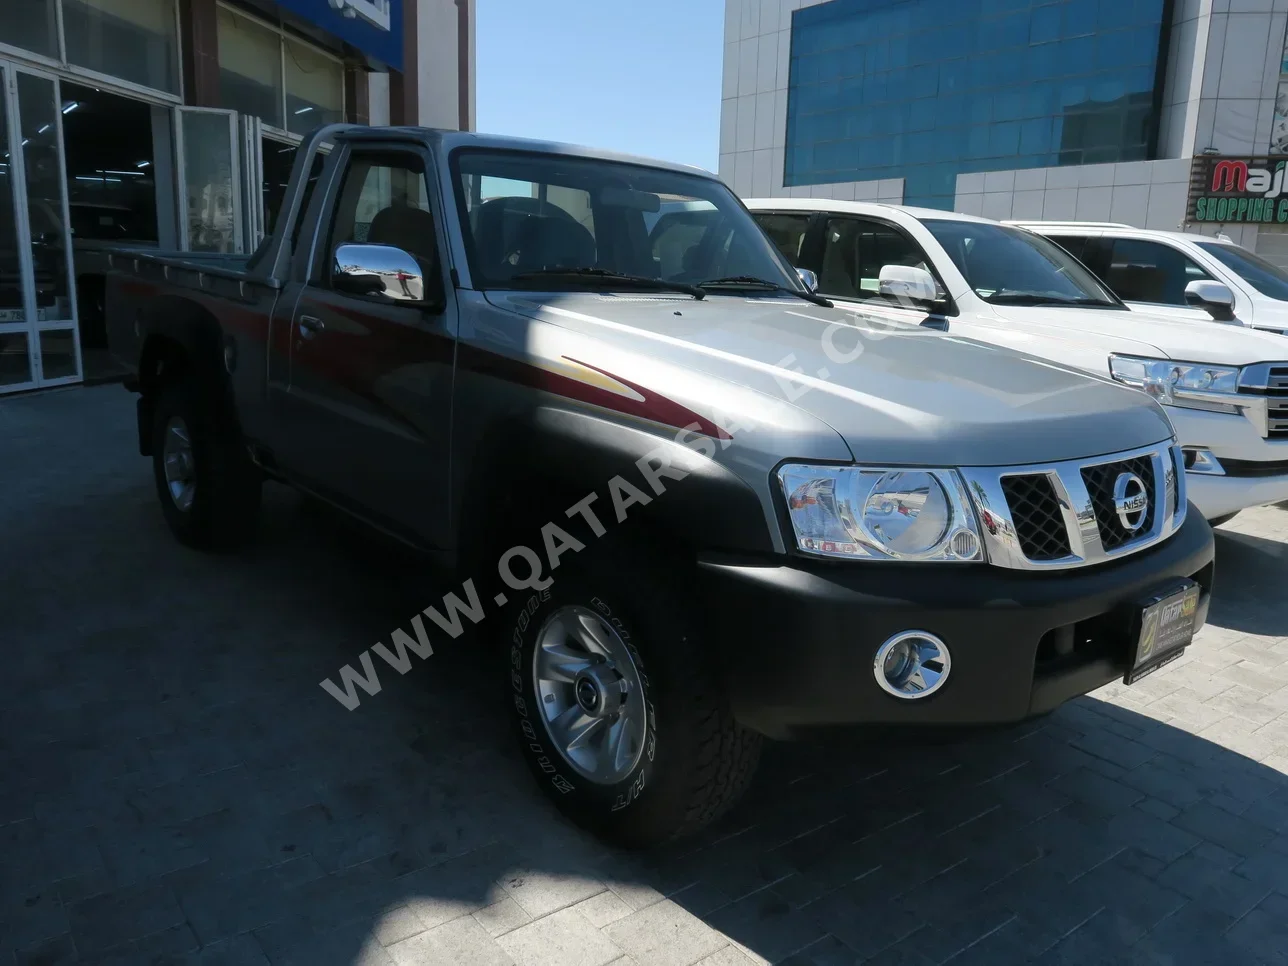 Nissan  Patrol  Pickup  2021  Manual  0 Km  6 Cylinder  Four Wheel Drive (4WD)  Pick Up  Gray  With Warranty